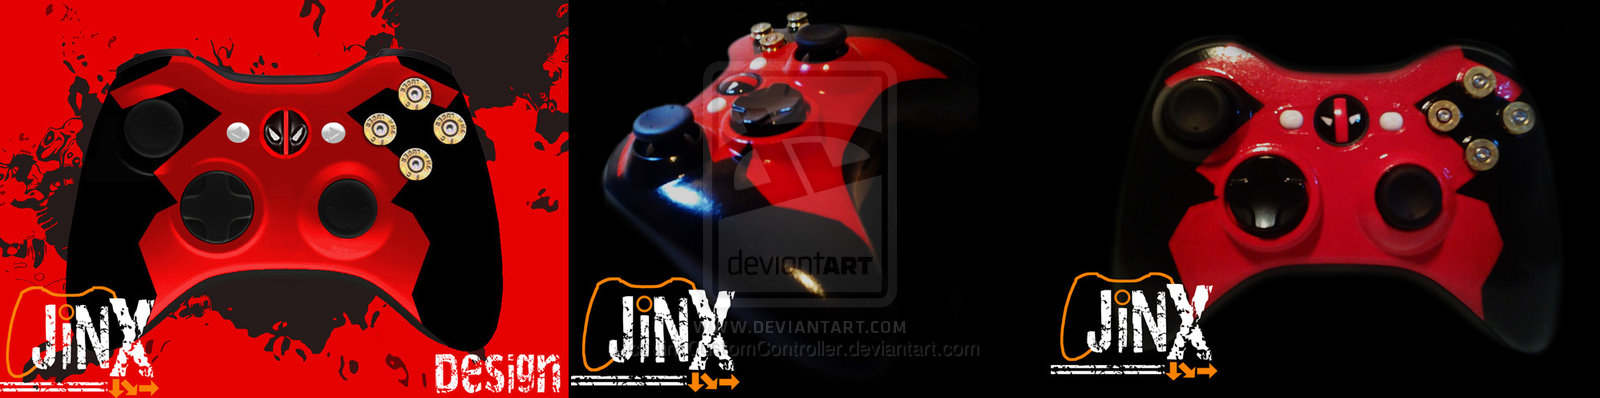 Jinx Xbox Deadpool Inspired Design Pleted By